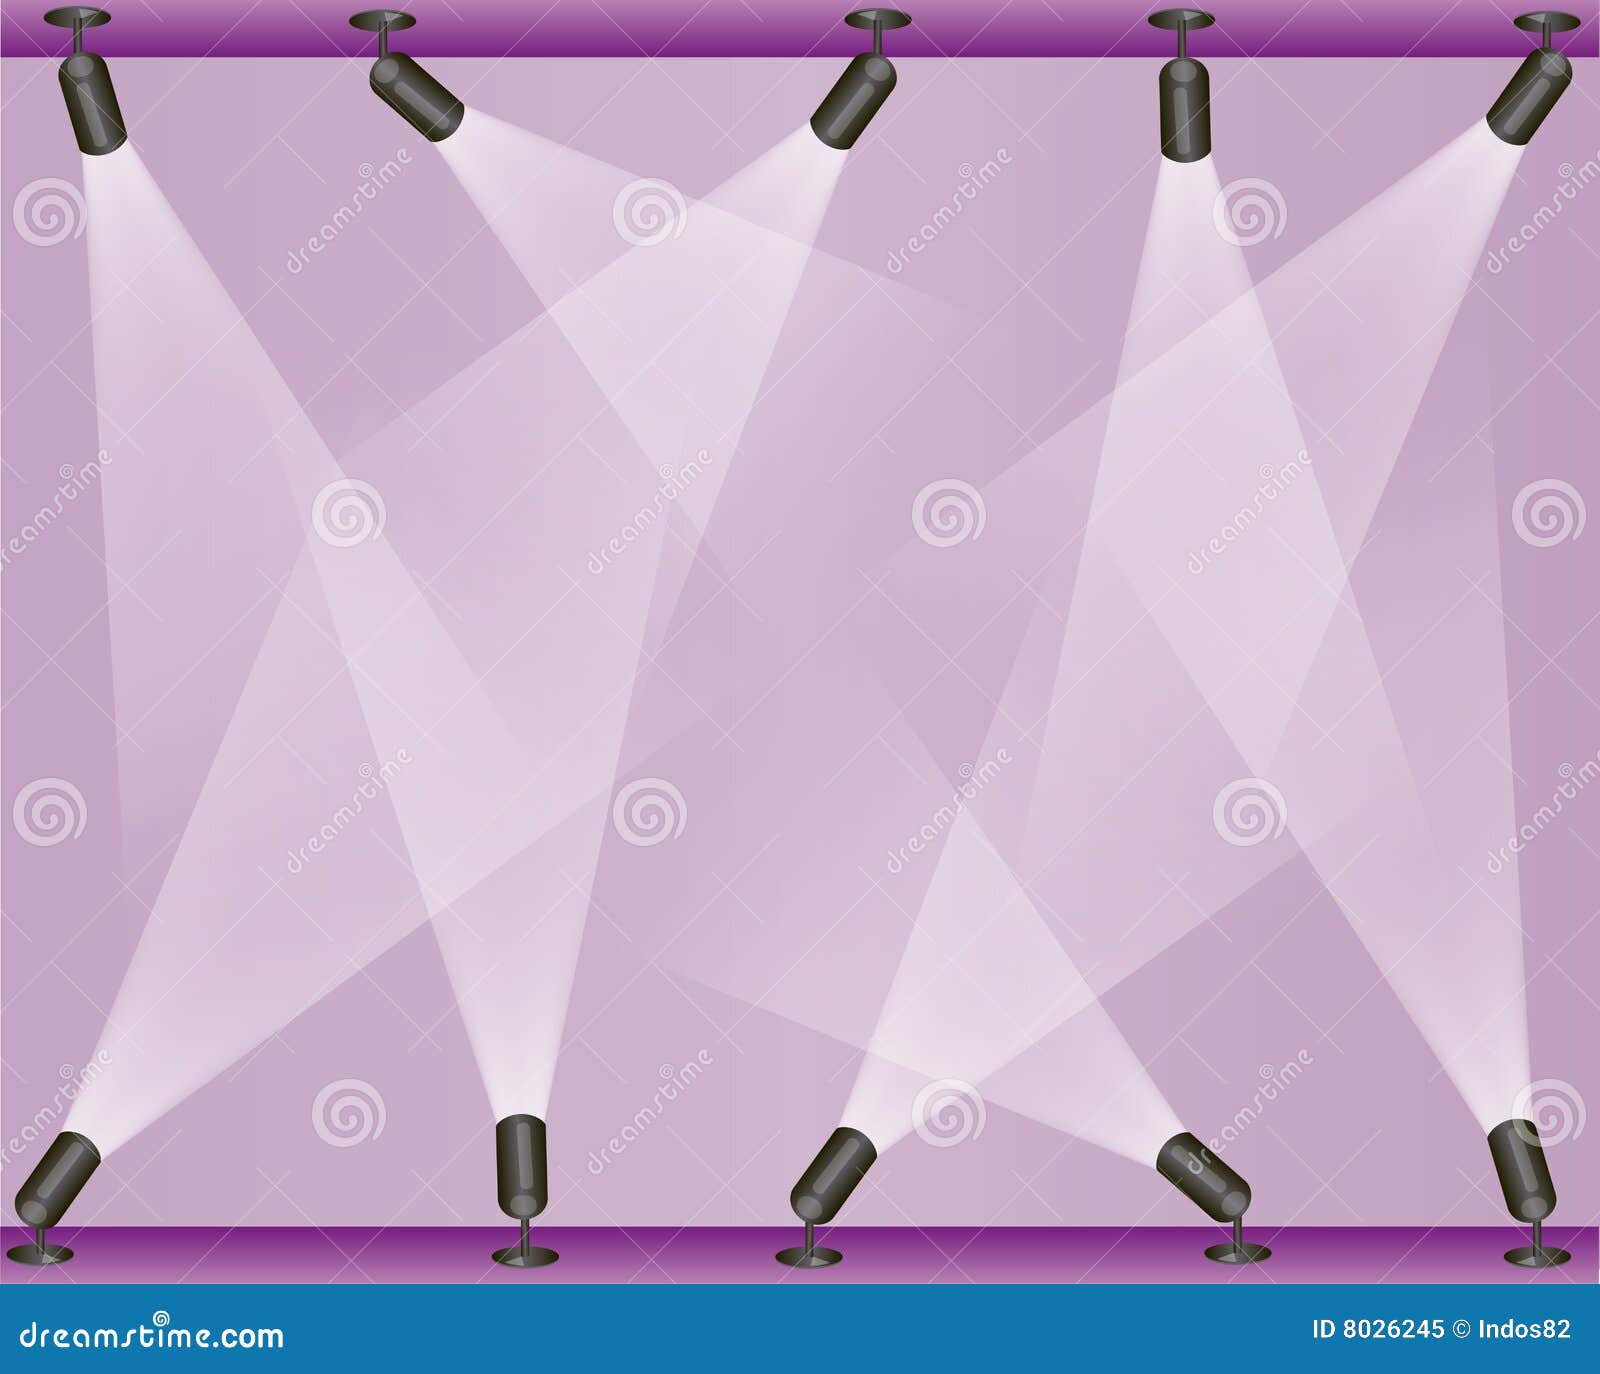 Stage lights stock vector. Illustration of entertainment - 8026245